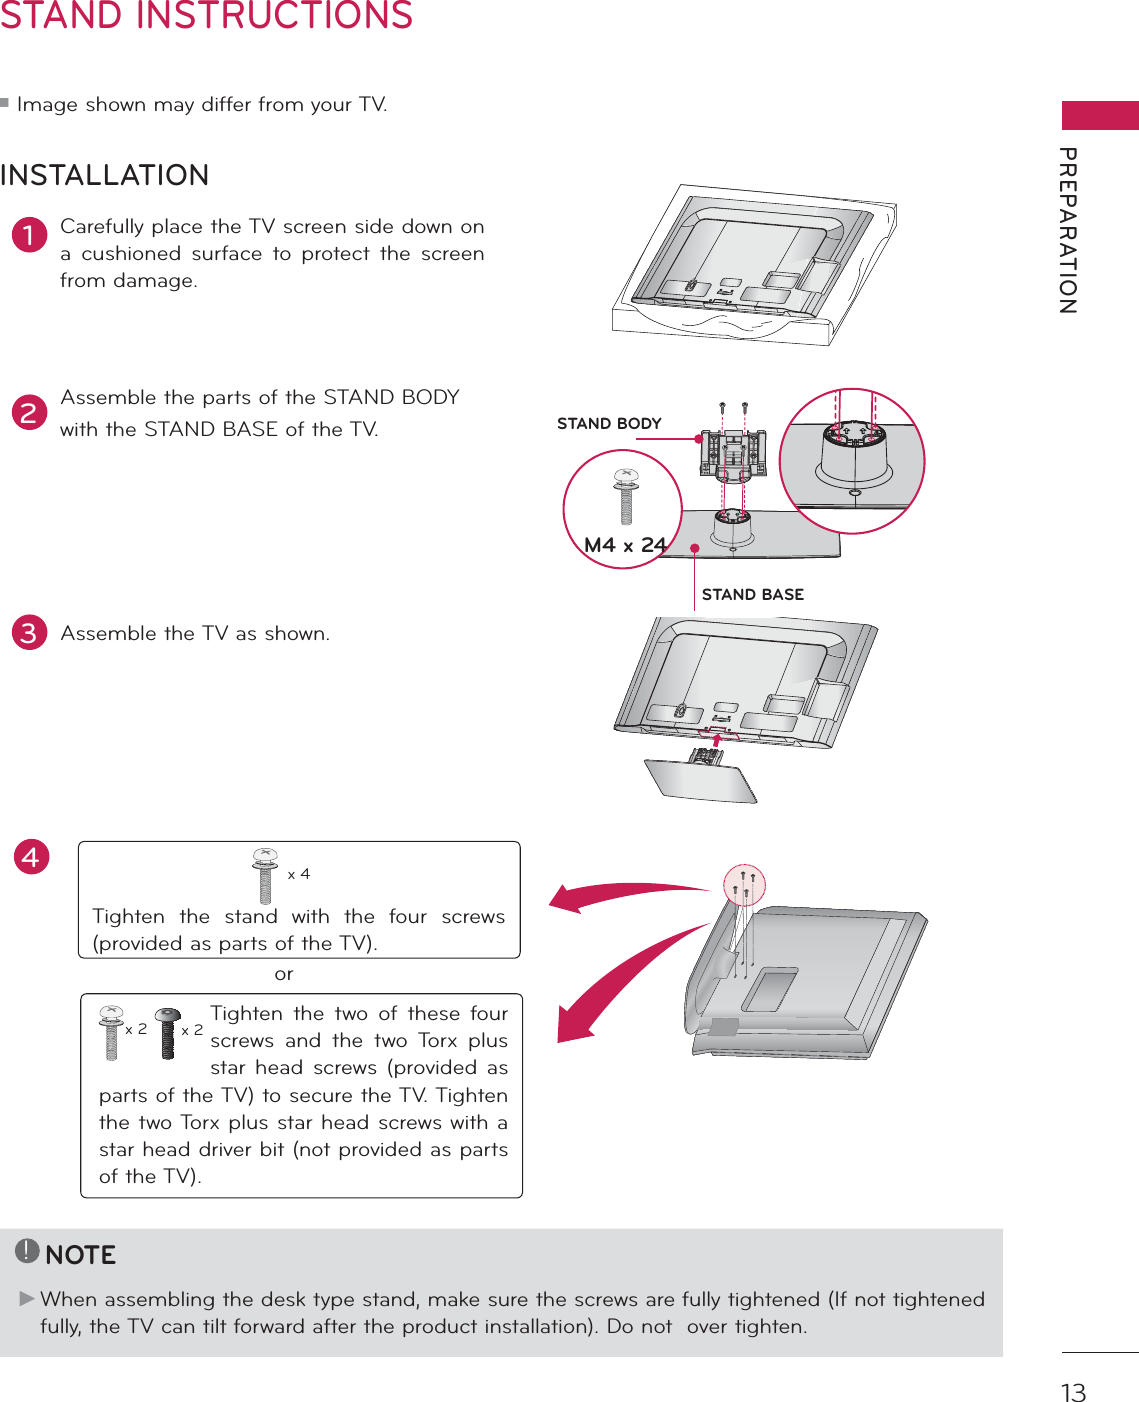 13PREPARATIONSTAND INSTRUCTIONS ᯫ Image shown may differ from your TV.1Carefully place the TV screen side down on a cushioned surface to protect the screen from damage.2Assemble the parts of the STAND BODYwith the STAND BASE of the TV.INSTALLATION!NOTEŹ When assembling the desk type stand, make sure the screws are fully tightened (If not tightened fully, the TV can tilt forward after the product installation). Do not  over tighten.3Assemble the TV as shown.Tighten the stand with the four screws (provided as parts of the TV).x 4orTighten the two of these four screws and the two Torx plus star head screws (provided as parts of the TV) to secure the TV. Tighten the two Torx plus star head screws with a star head driver bit (not provided as parts of the TV).x 2 x 2M4 x 24STAND BASESTAND BODYAC  INCABLE  MANAGEMENTAC  INCABLE  MANAGEMENT4